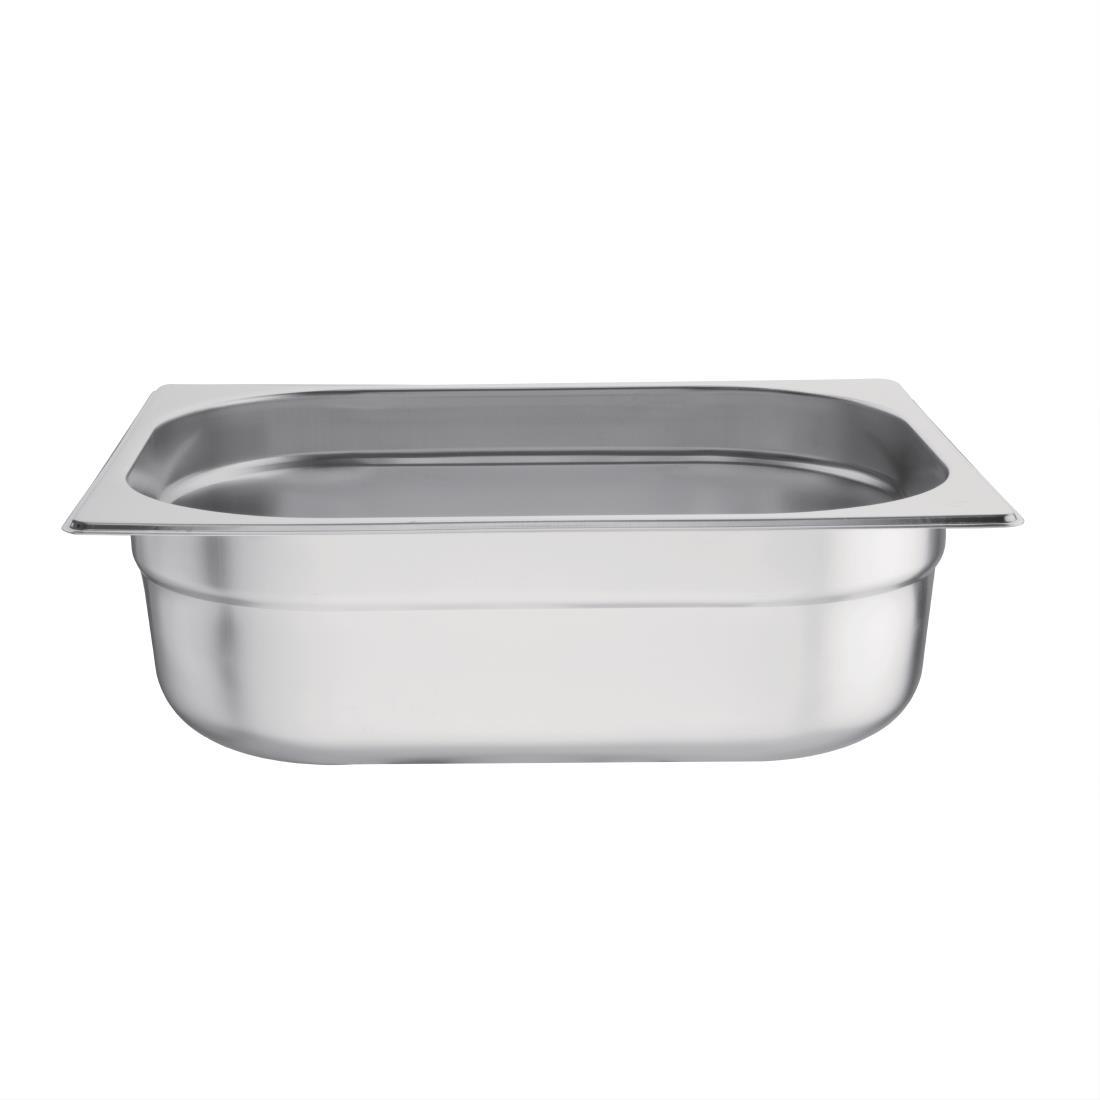 Vogue Stainless Steel 1/2 Gastronorm Pan 100mm - K928  - 2